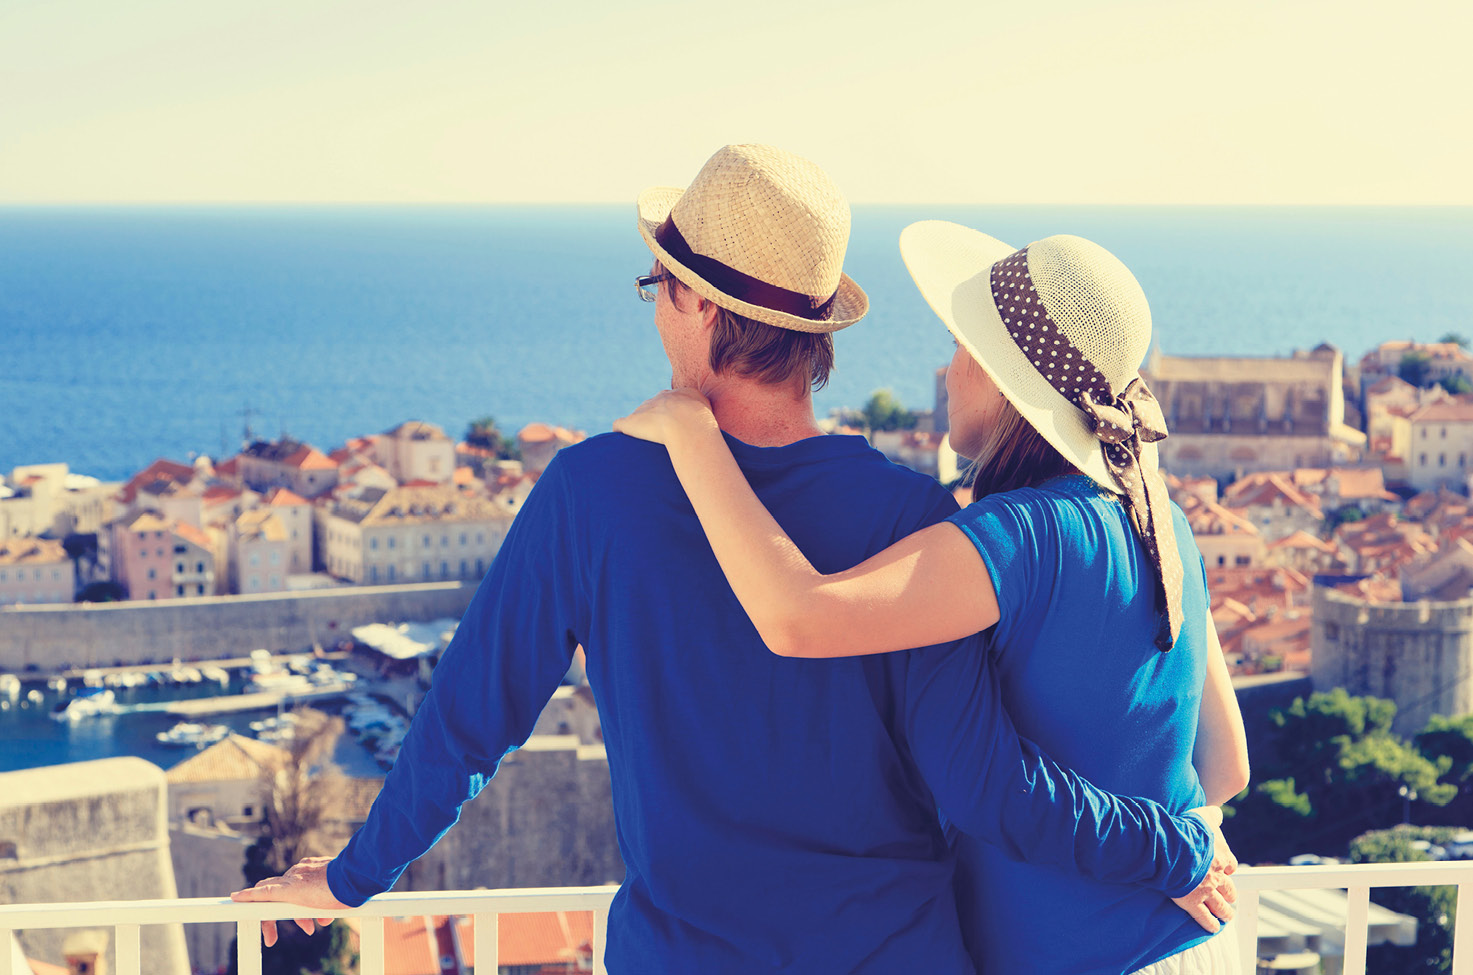 A couple wearing blue shirts and sun hats, as they look over a balcony to view the town and sea below